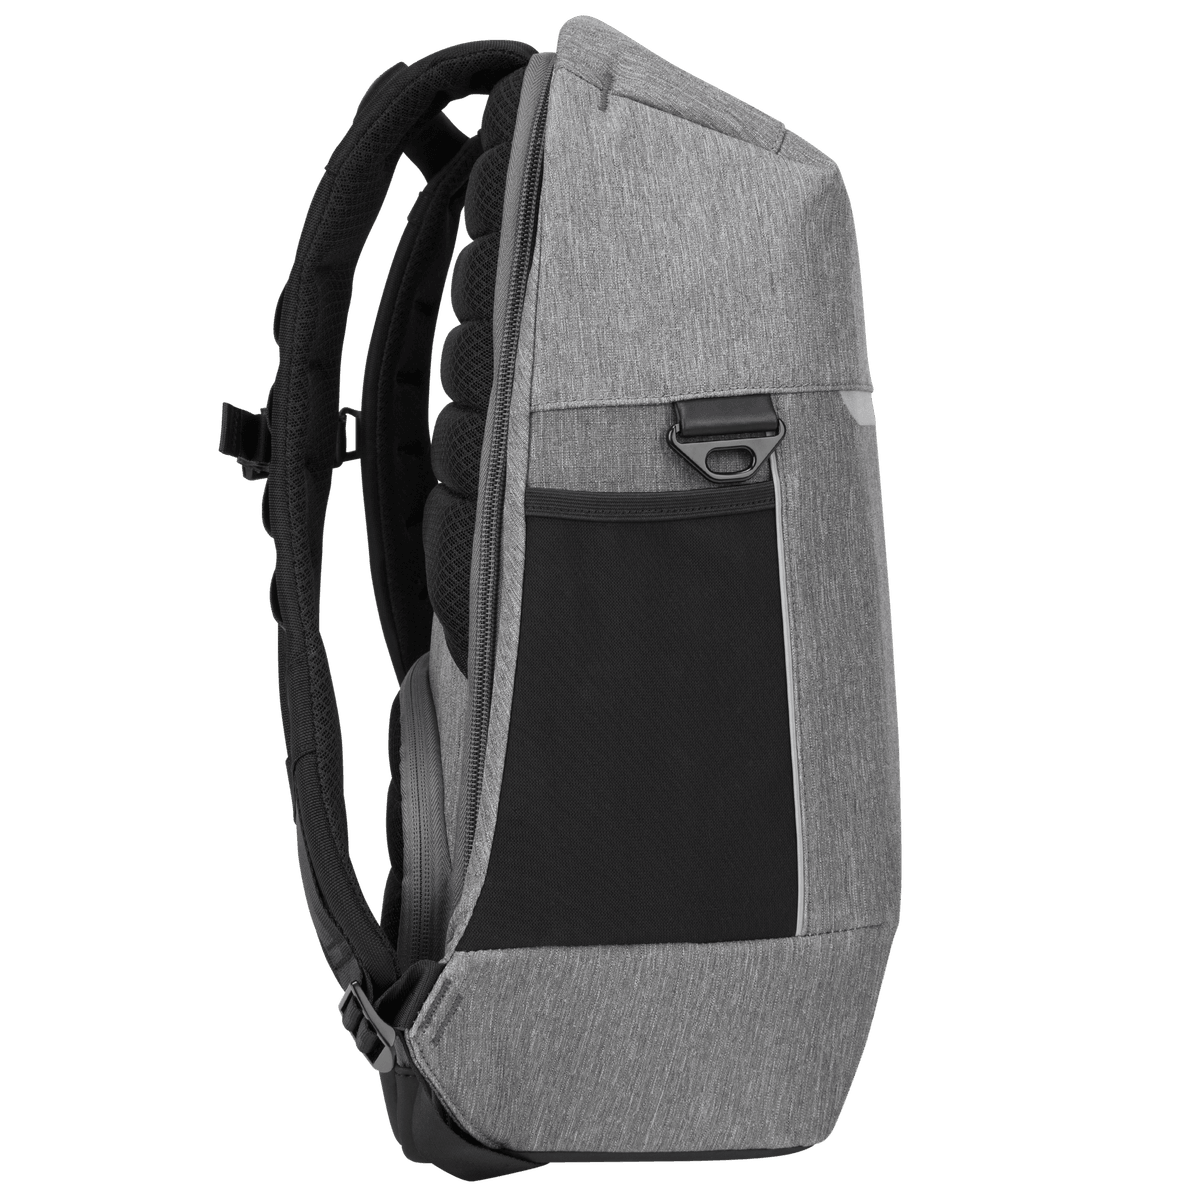 Theft-Resistant Backpack | CityLite Pro Security at Targus